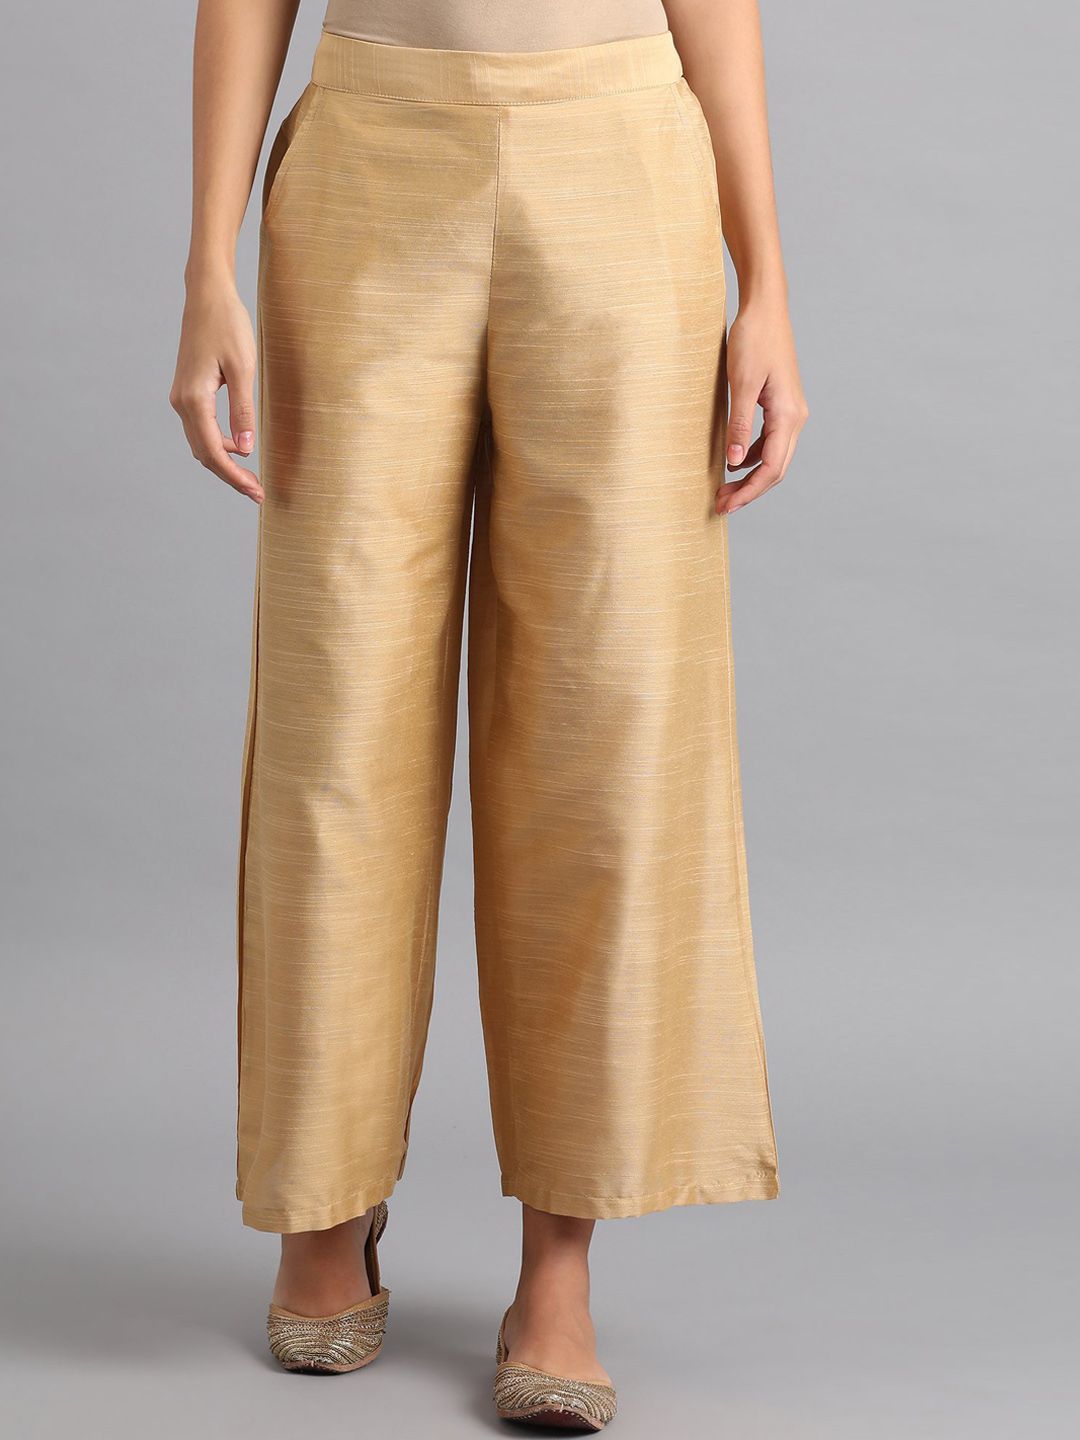 W Women Gold-Toned Loose Fit Ethnic Trousers Price in India